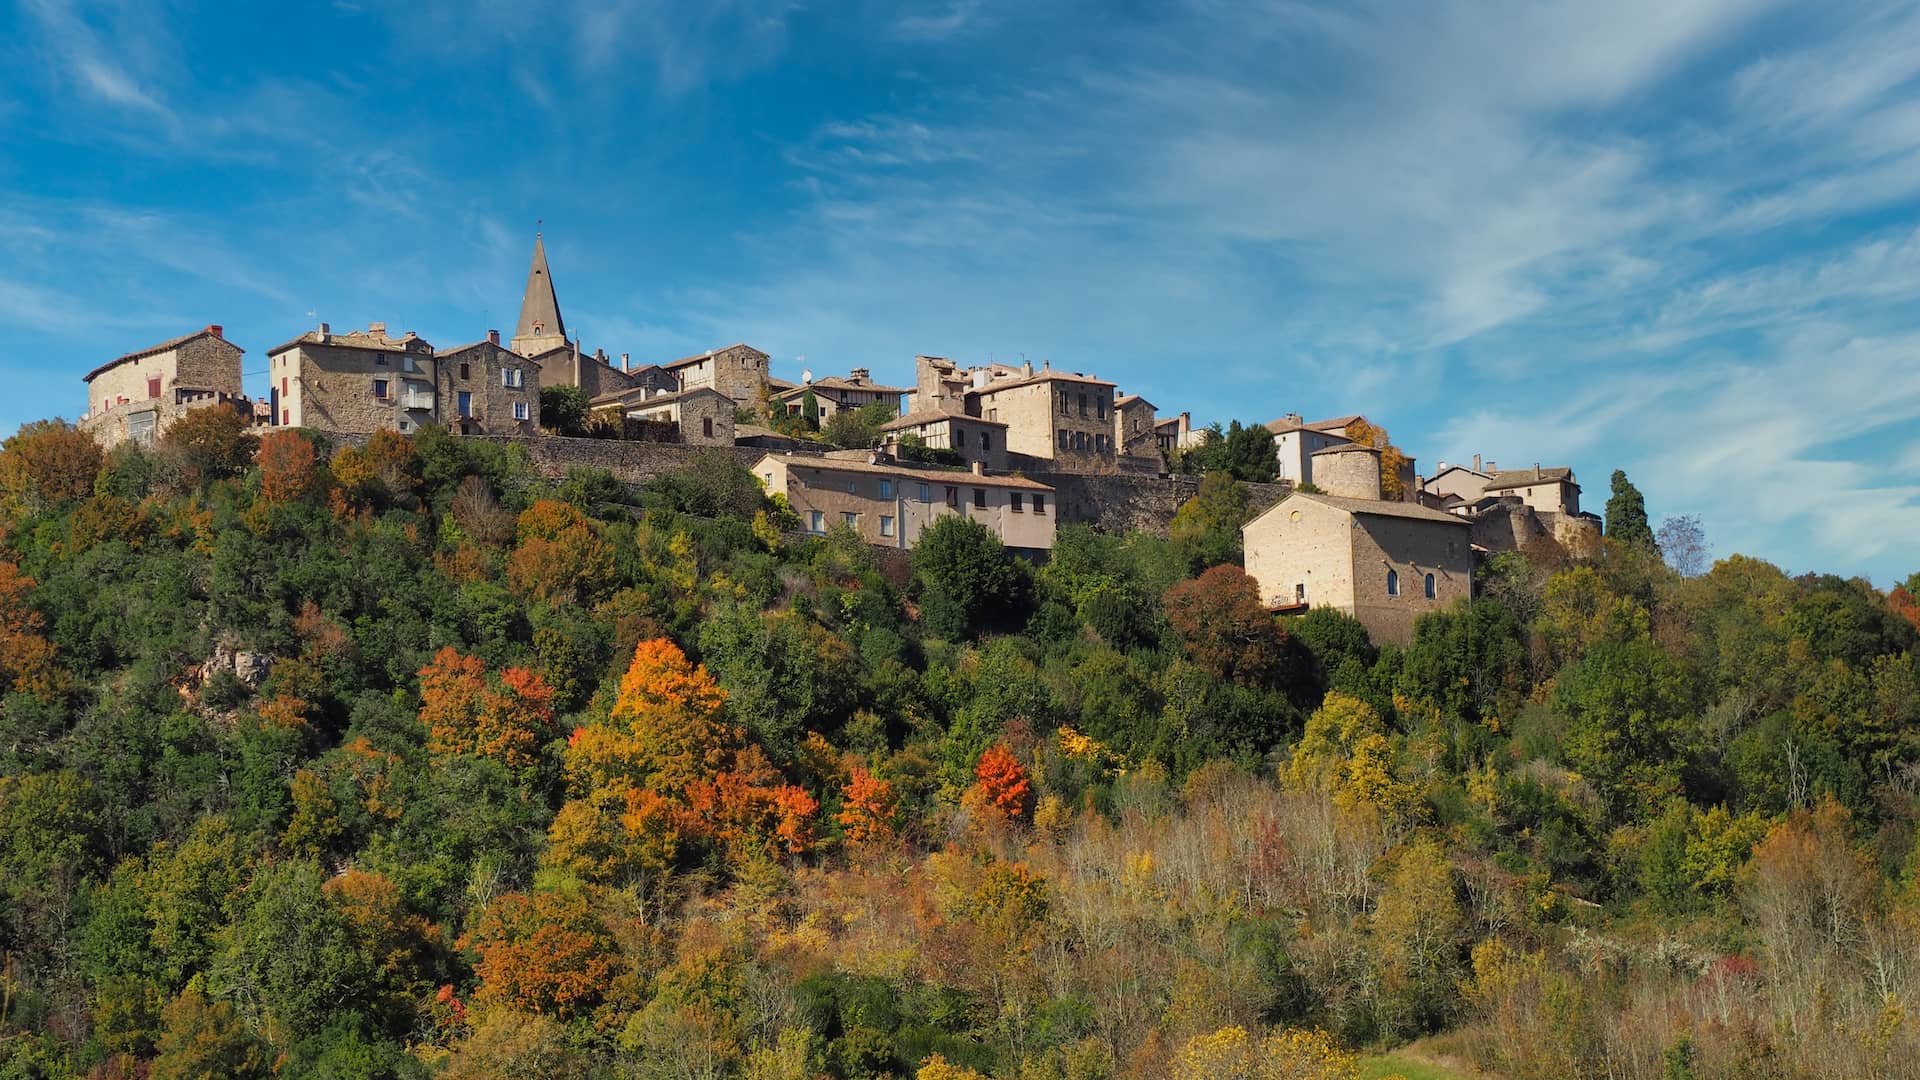 An old stone-built town looks out over a hillside of autumnal trees